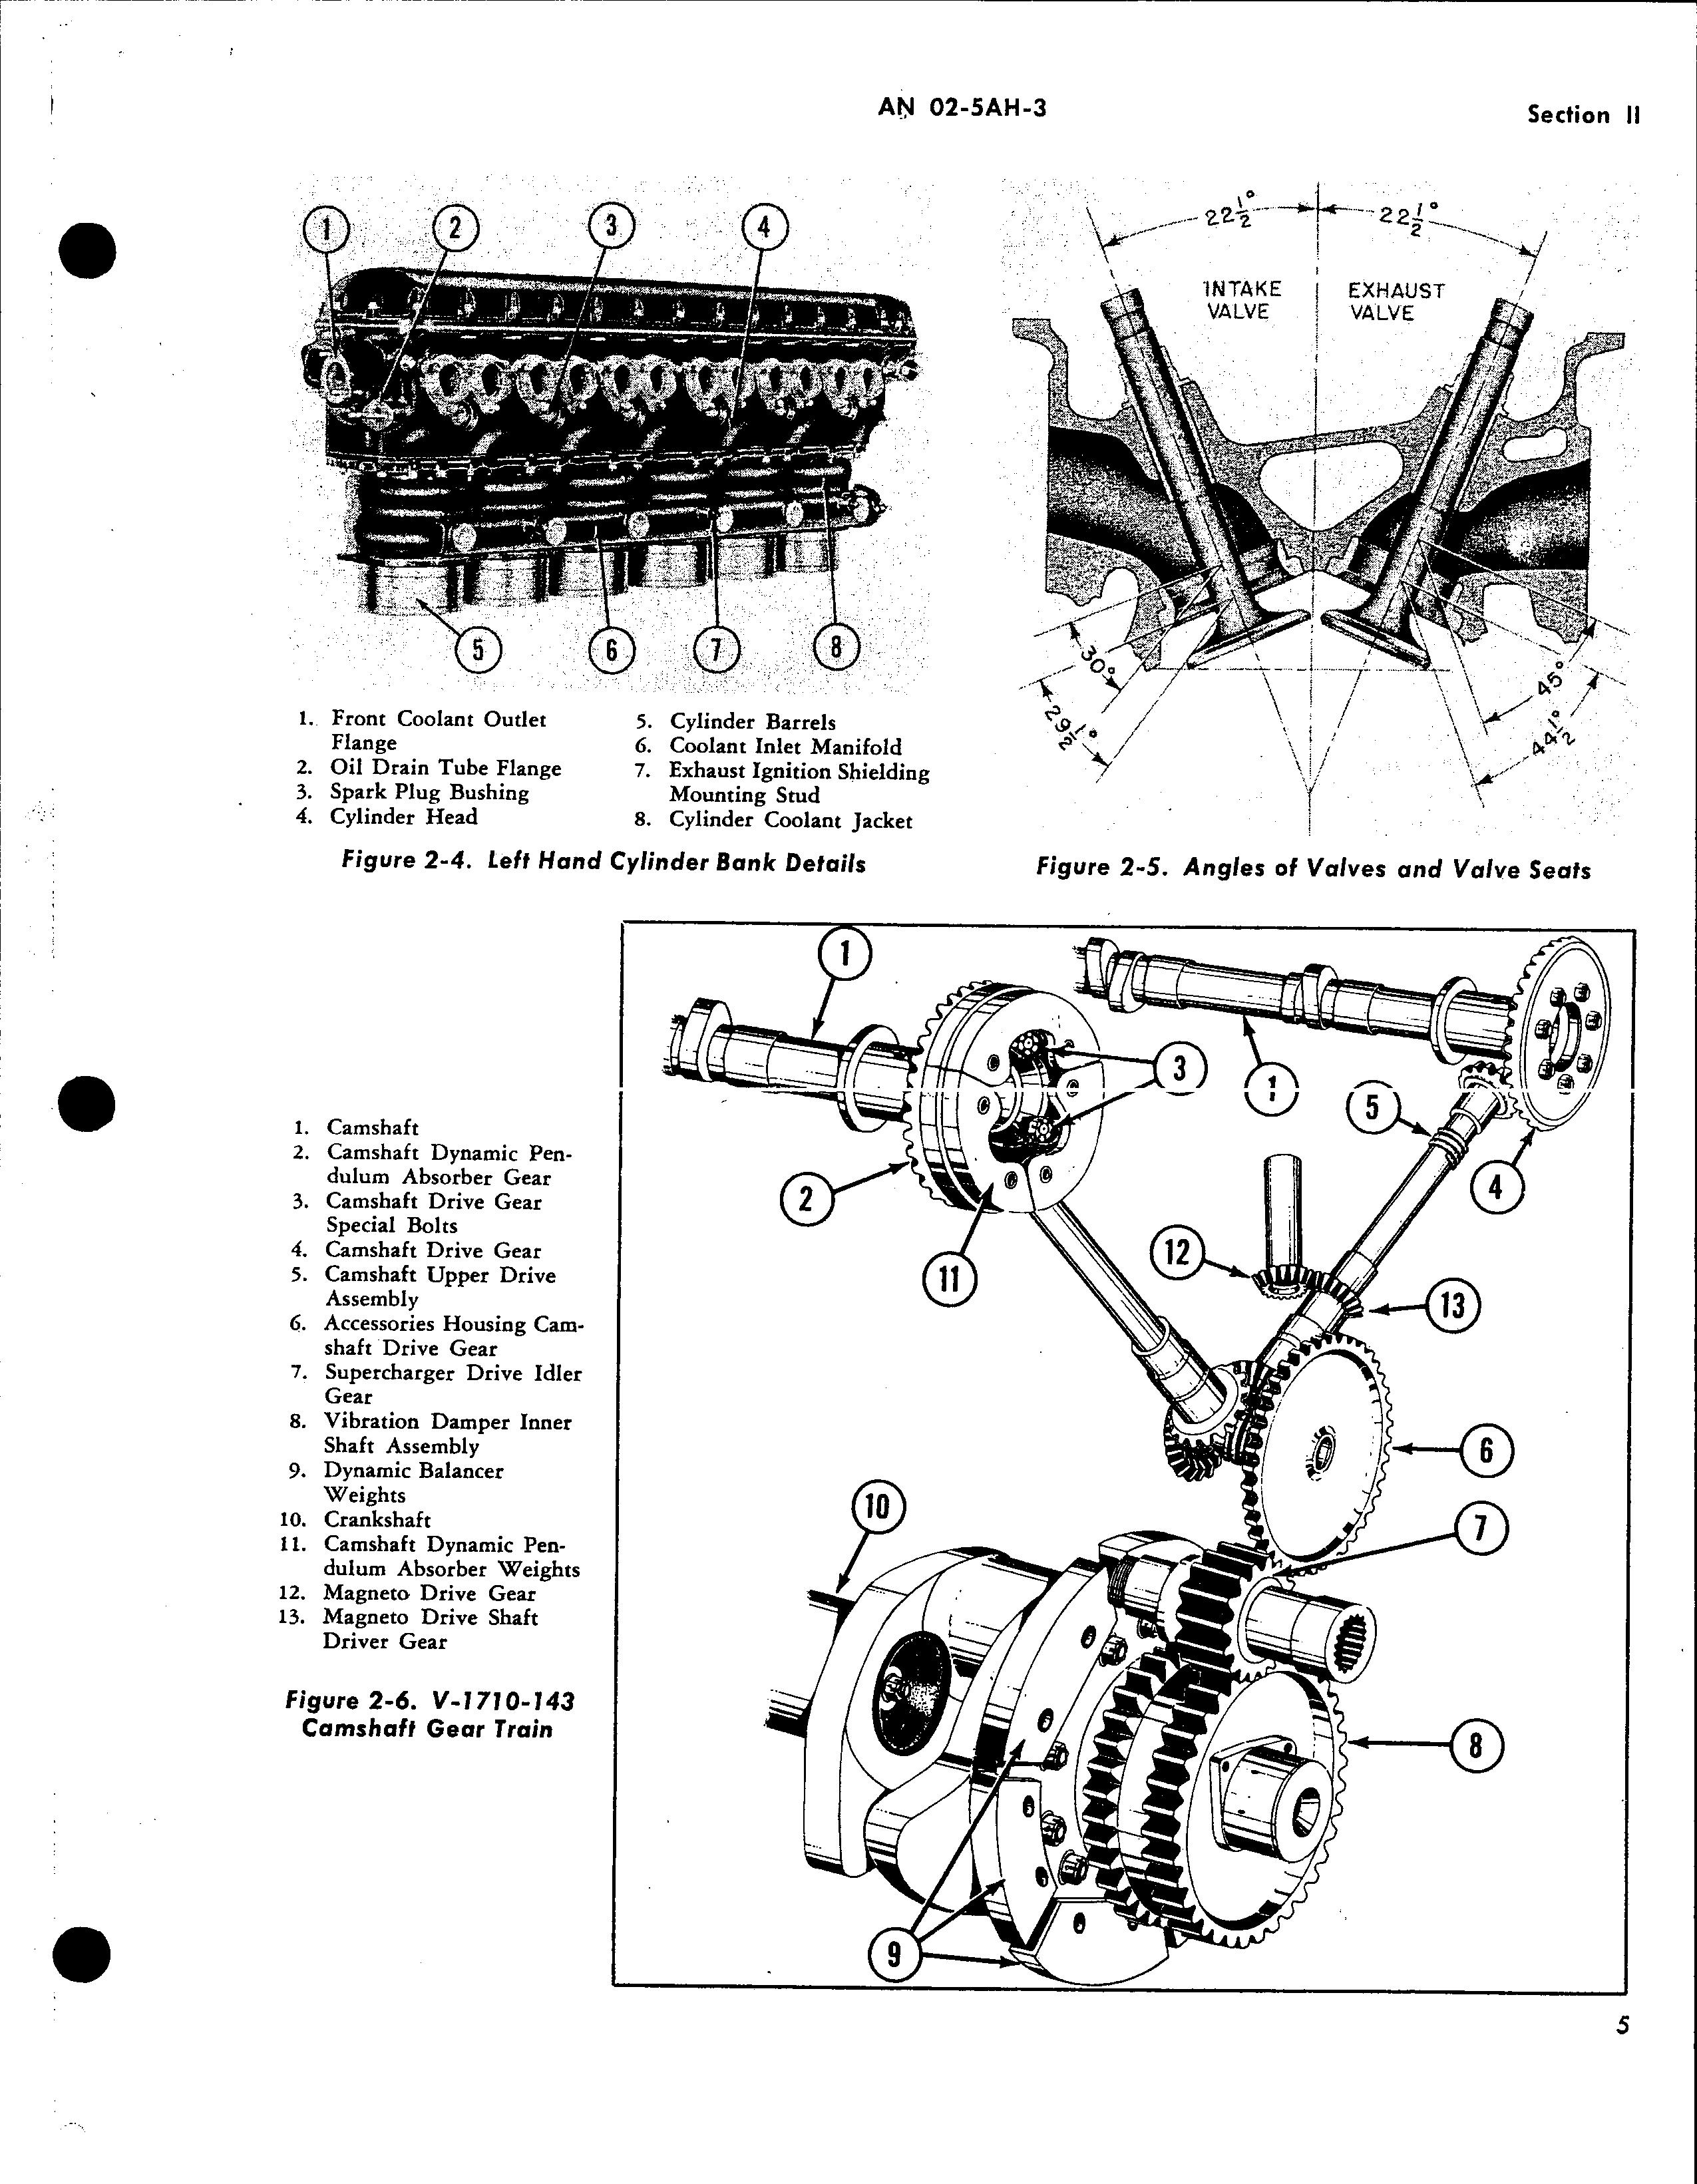 Sample page 11 from AirCorps Library document: Overhaul Instructions for Models V-1710-143 and -145 Aircraft Engines